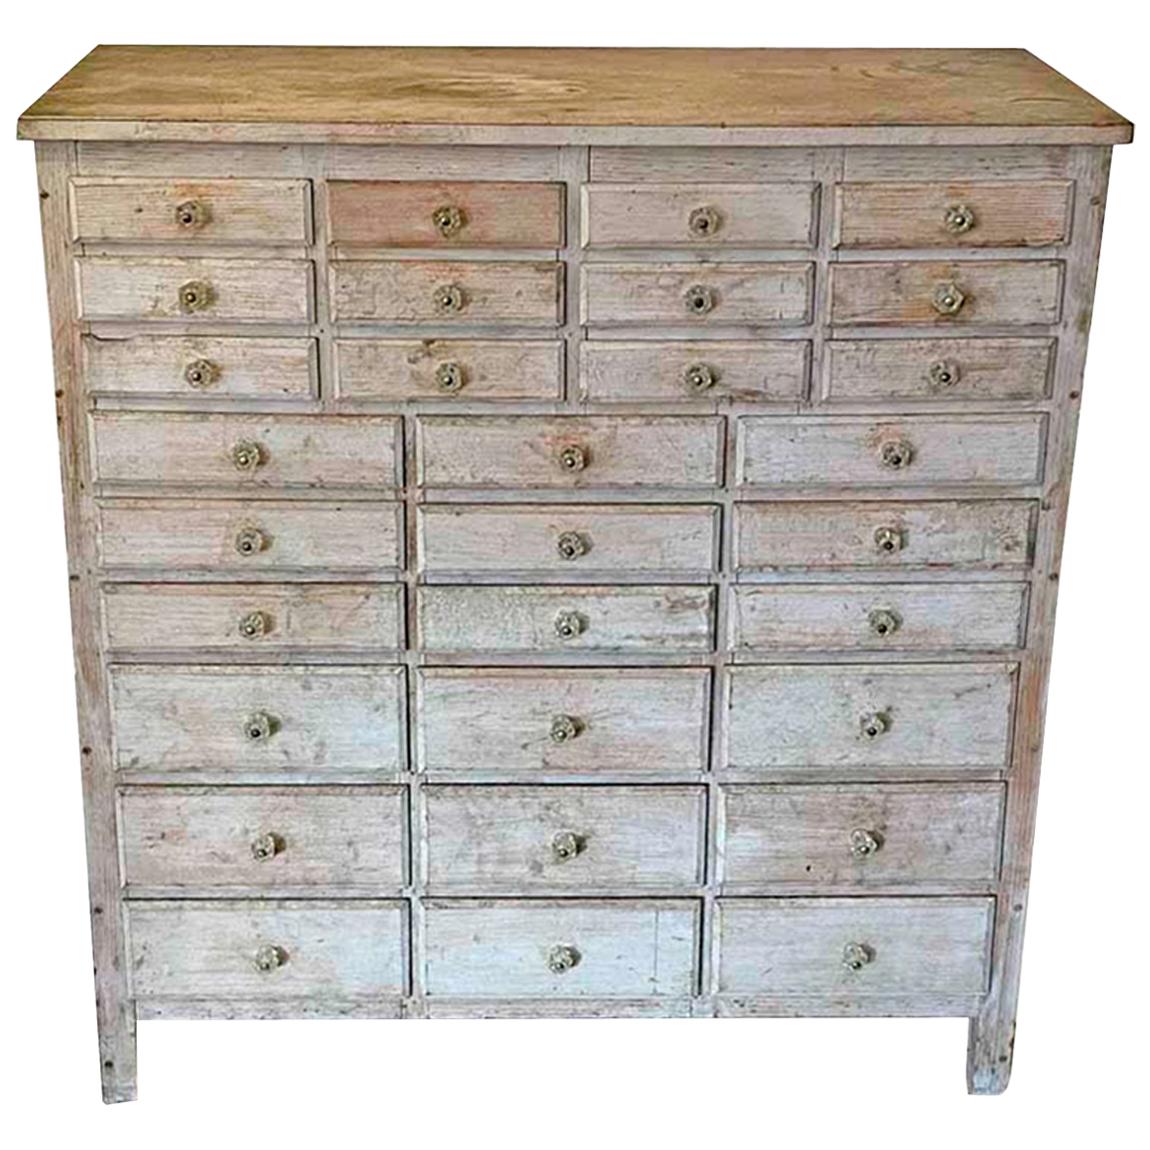 20th Century Painted 30 Drawer Apothecary or Country Store Cabinet